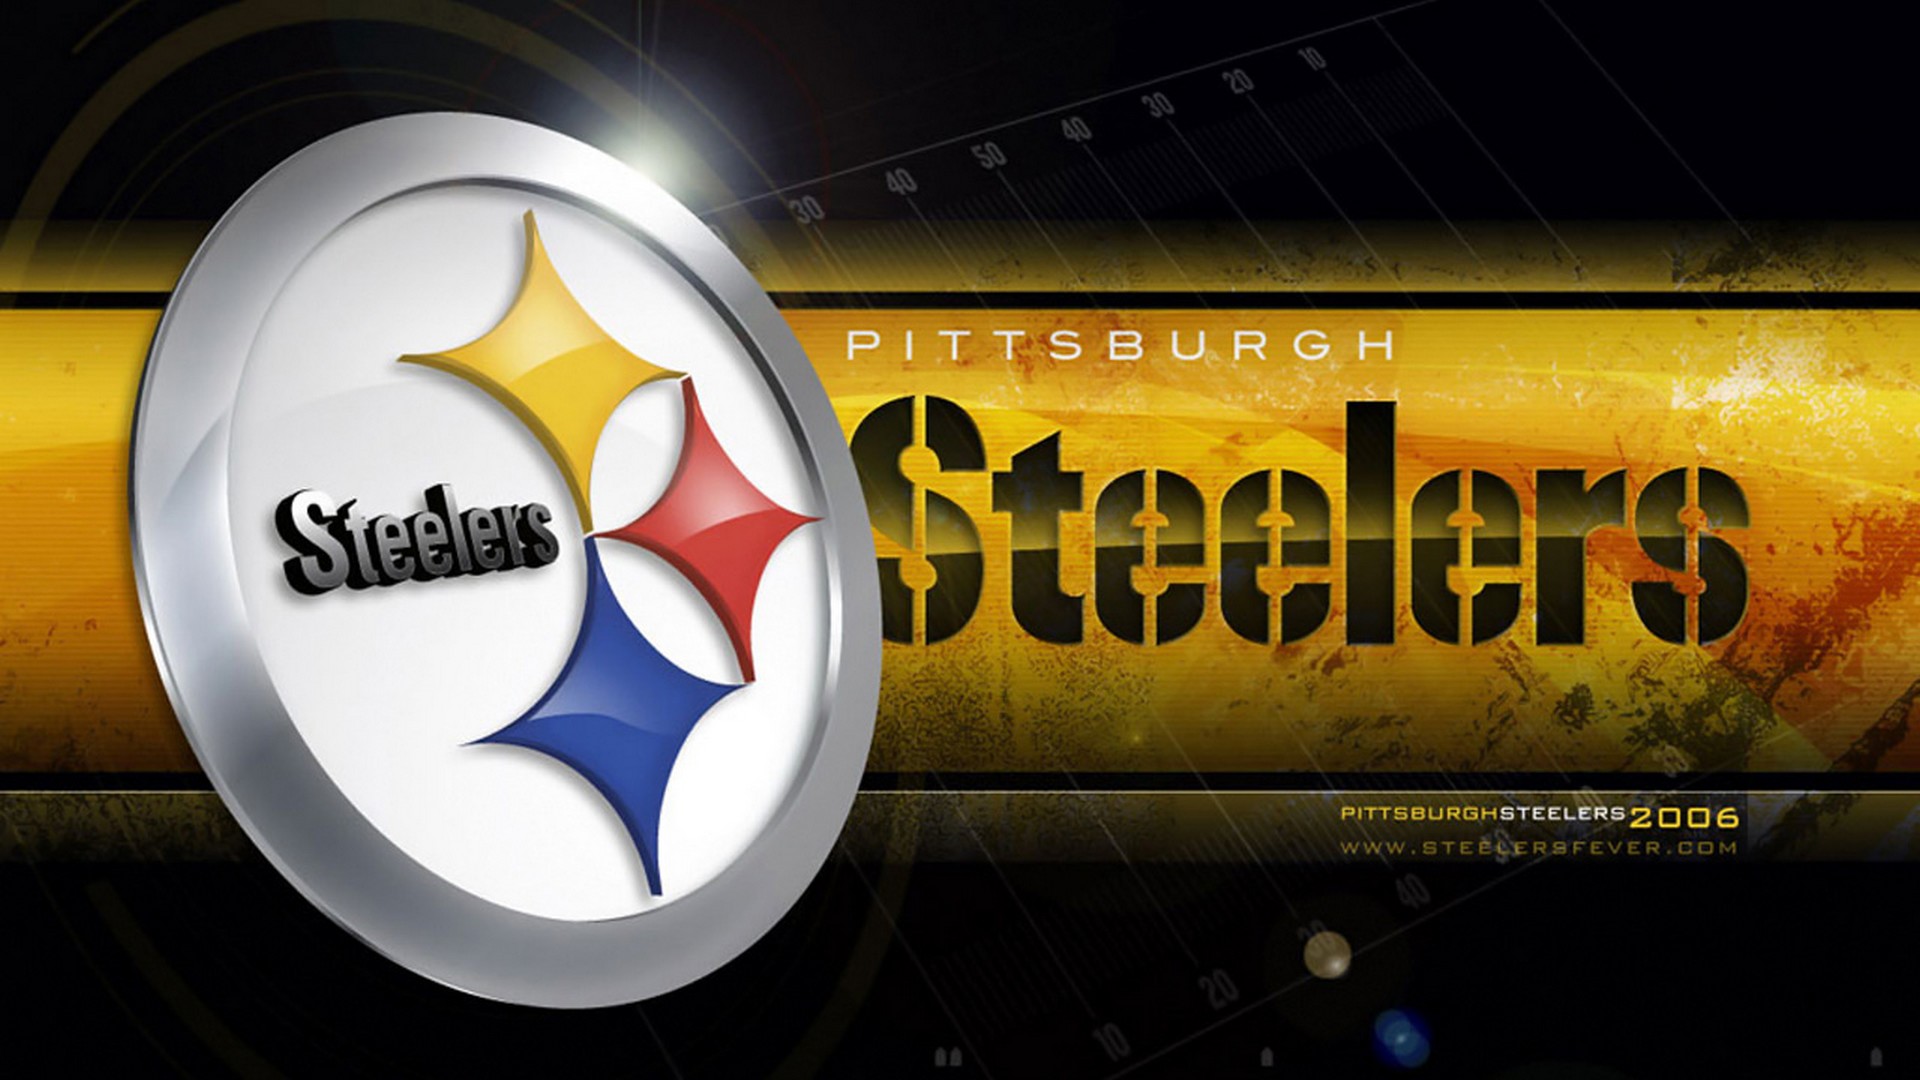 Steelers Logo Wallpaper For Mac Backgrounds With Resolution 1920X1080 pixel. You can make this wallpaper for your Mac or Windows Desktop Background, iPhone, Android or Tablet and another Smartphone device for free